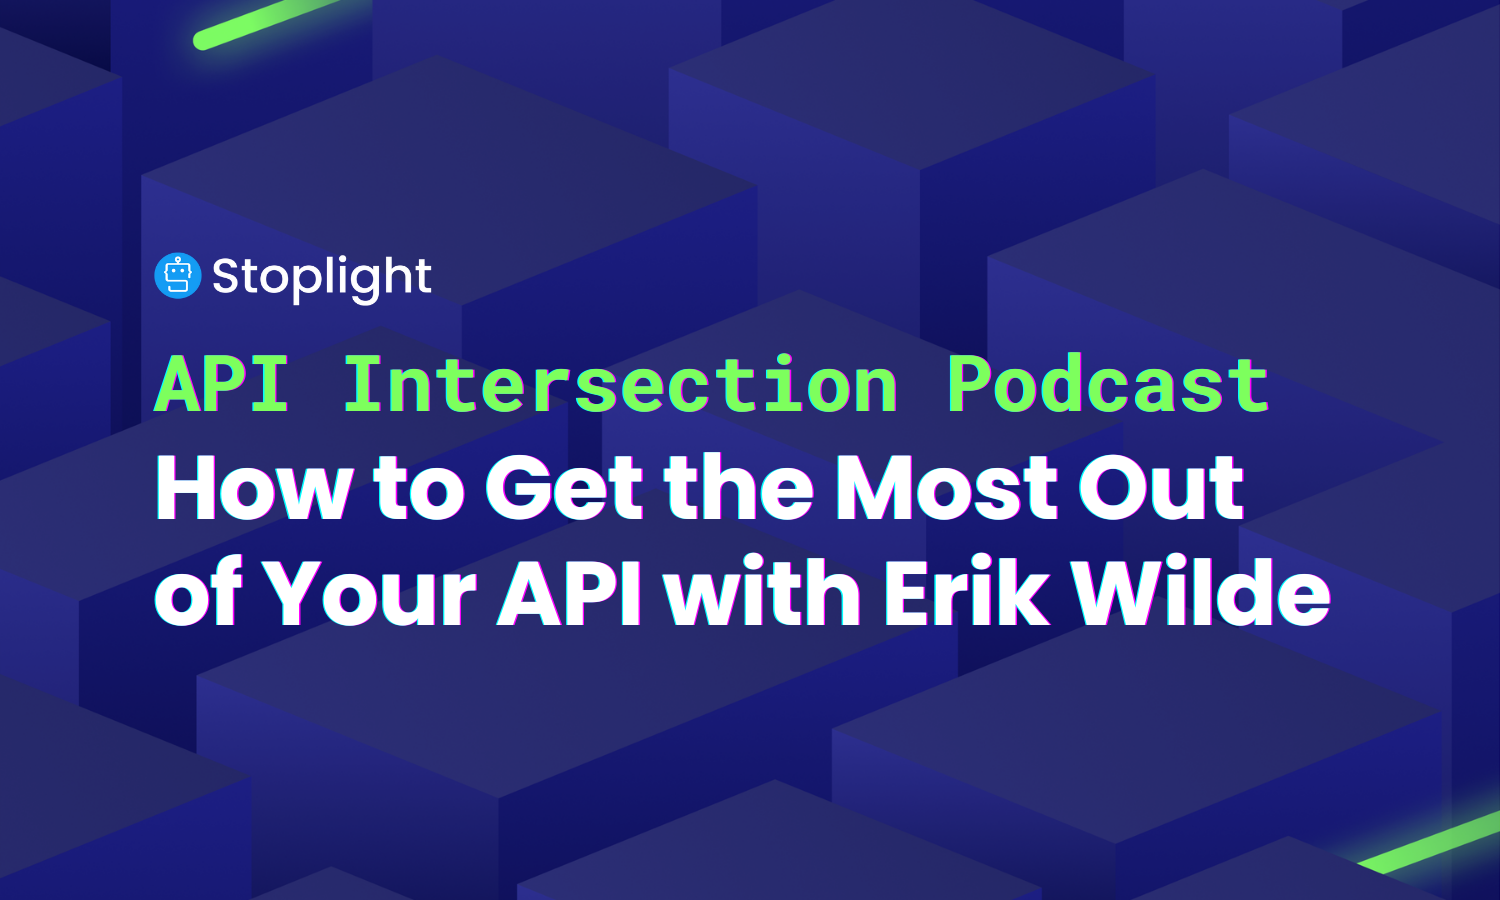 How to Get the Most Out of Your API